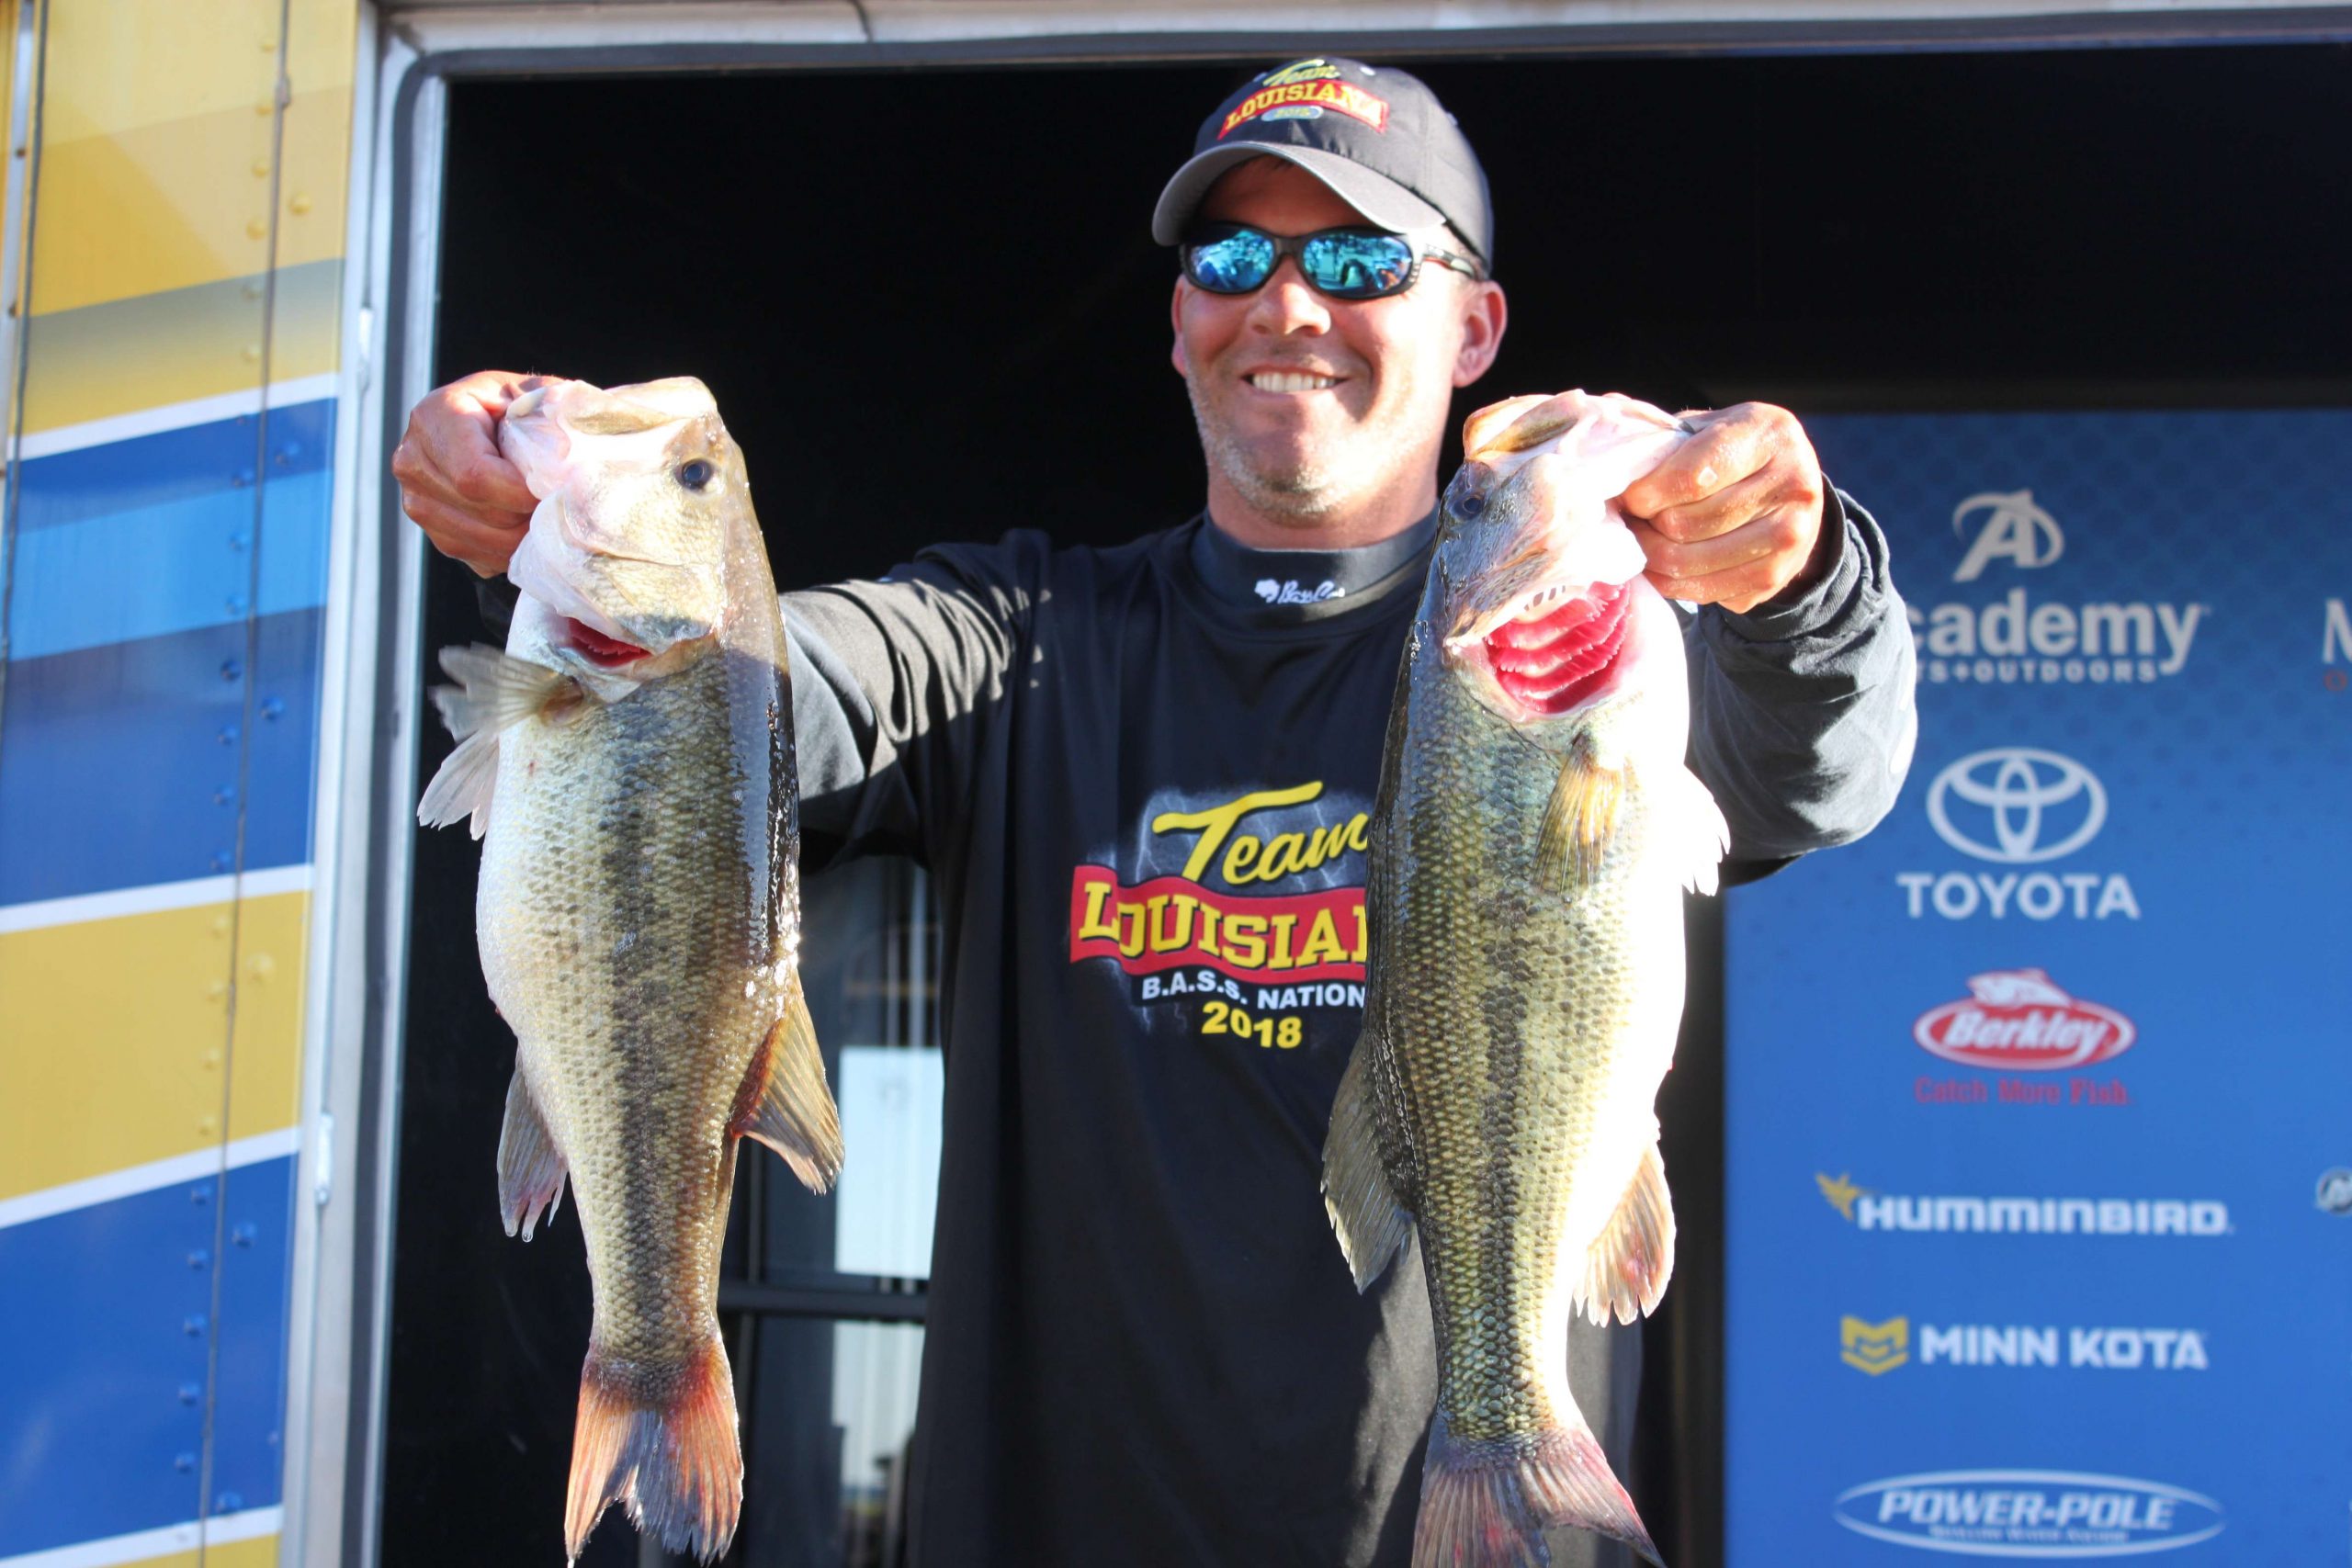 Jamie Laiche of Team Louisiana is tied for sixth in the boating division with 19-4.
